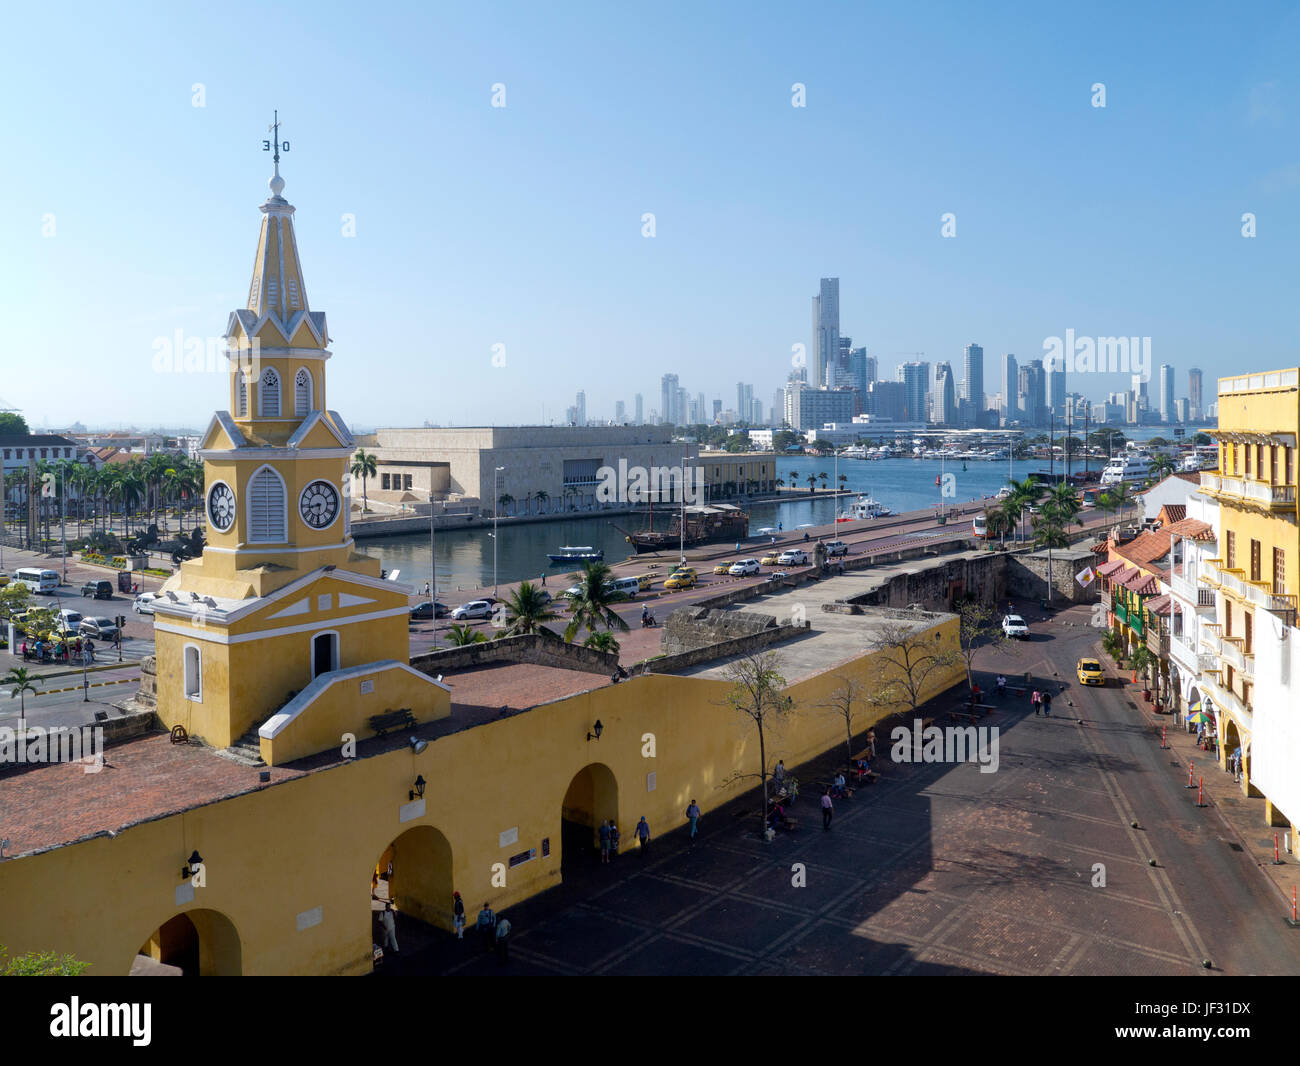 Plaza de los Coches, old city entrance with new city skyline in back ground, Cartegena, Colombia Stock Photo